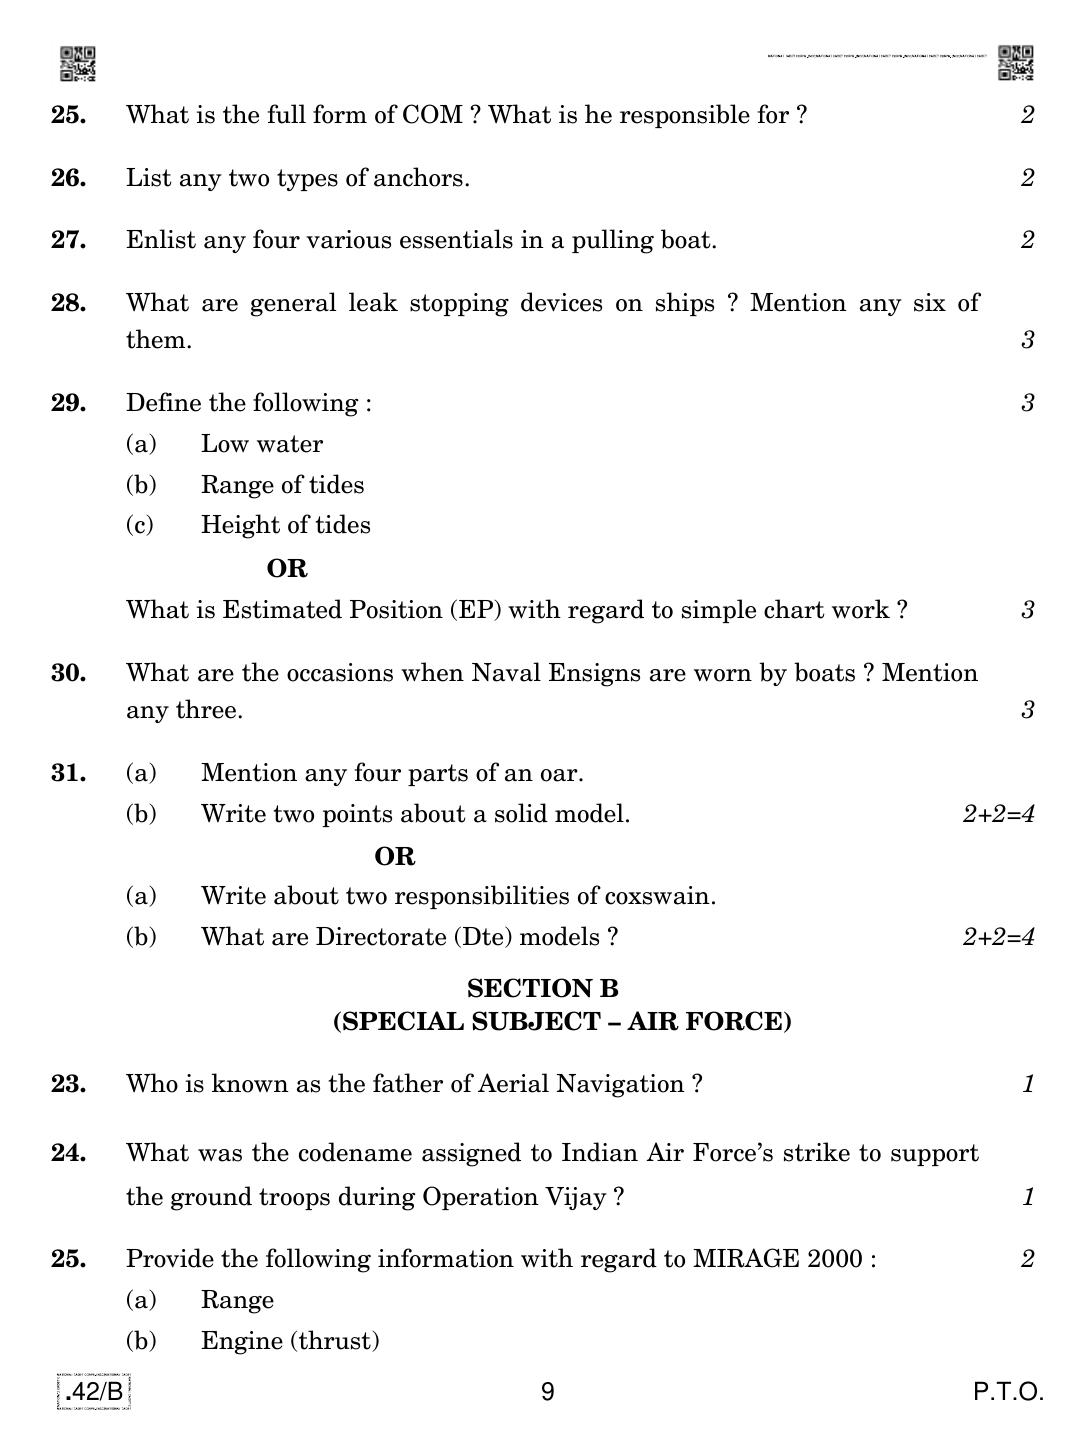 CBSE Class 12 NCC 2020 Compartment Question Paper - Page 9